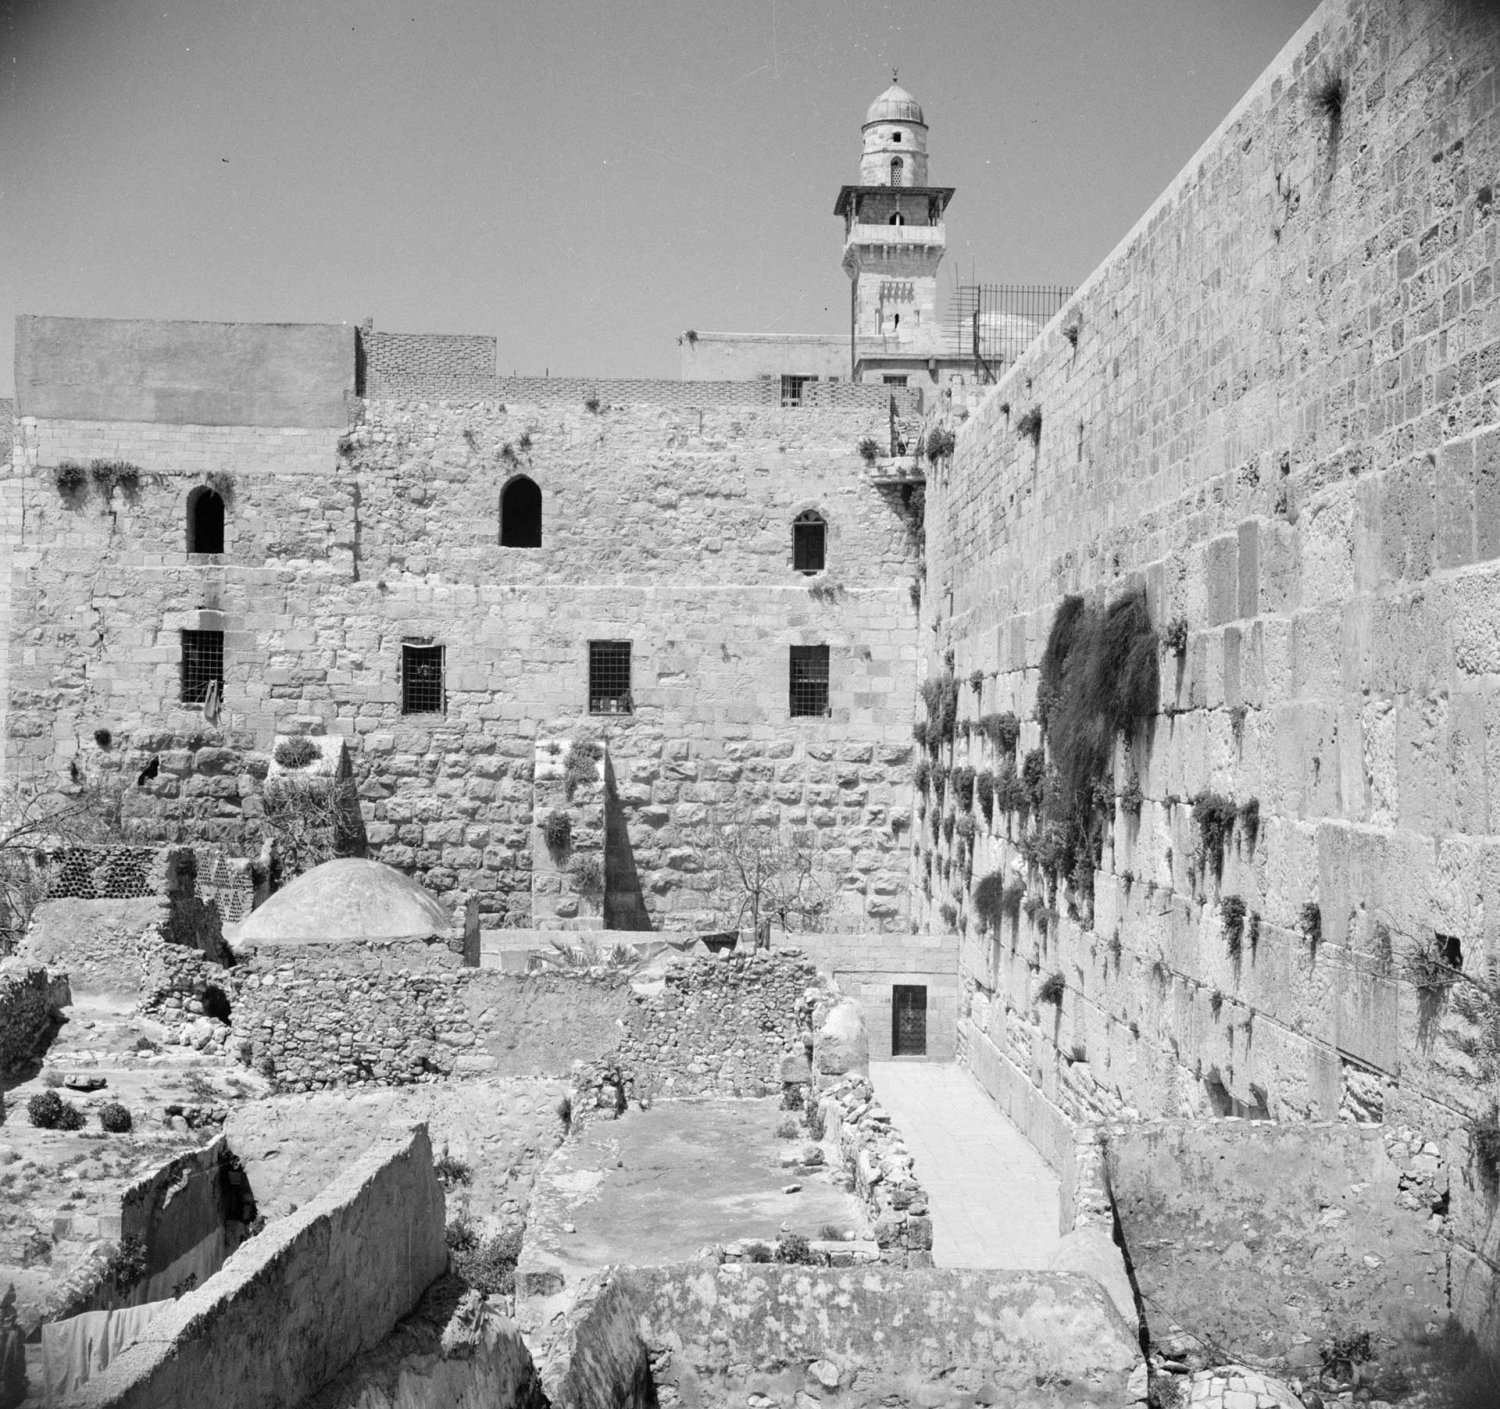 View of the Moroccan Quarter and the Western (al-Buraq) Wall, with a passageway cleared by the Ottoman Empire